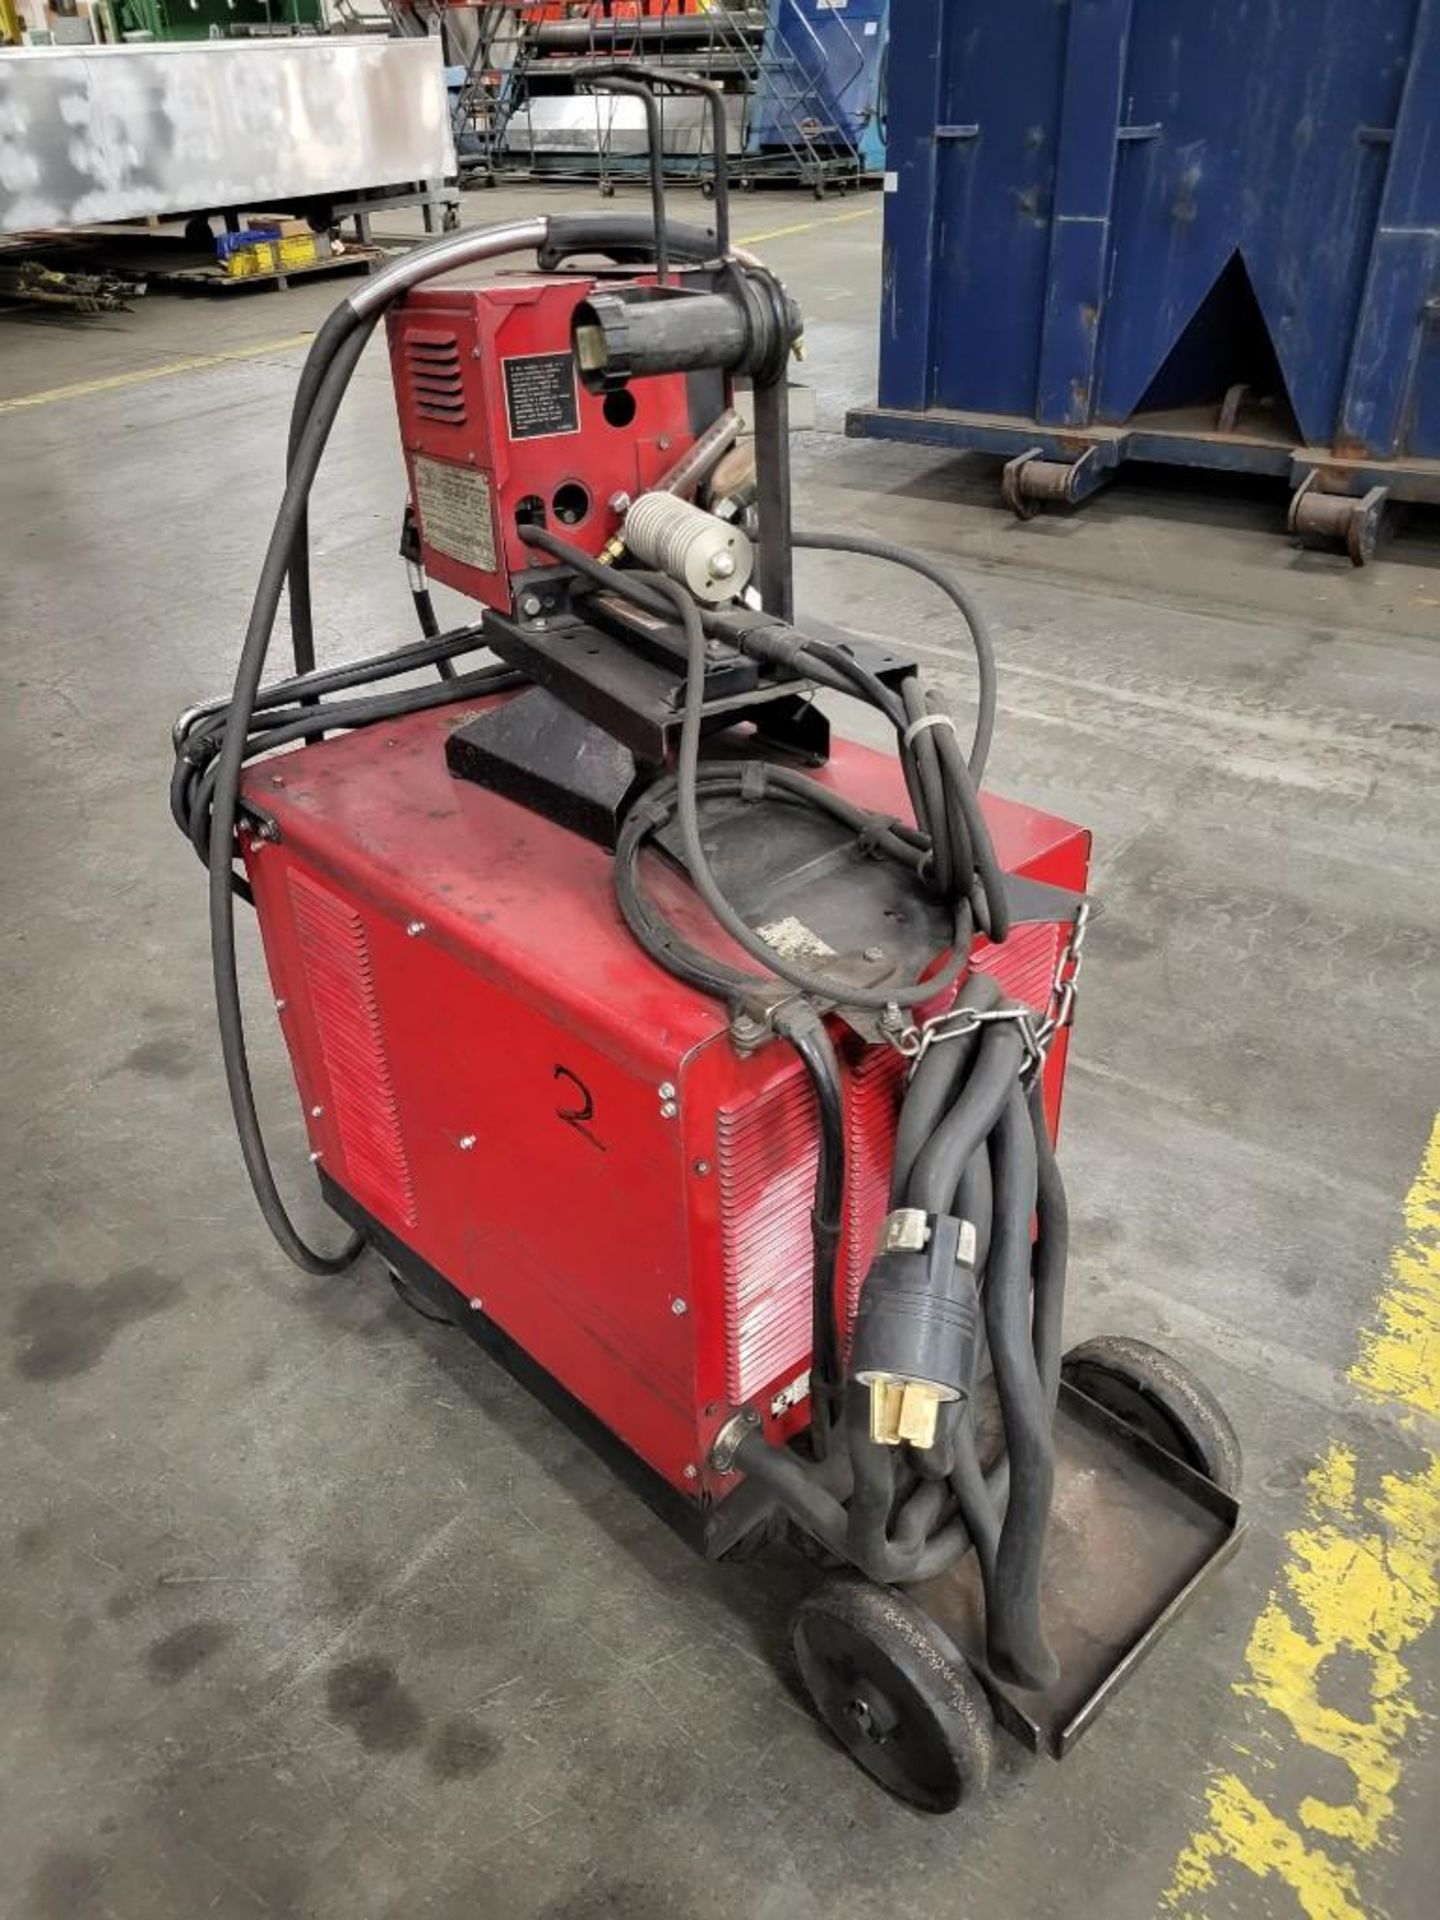 LINCOLN ELECTRIC CV-300 MIG WELDER WITH LN-7 WIRE FEEDER - Image 3 of 9